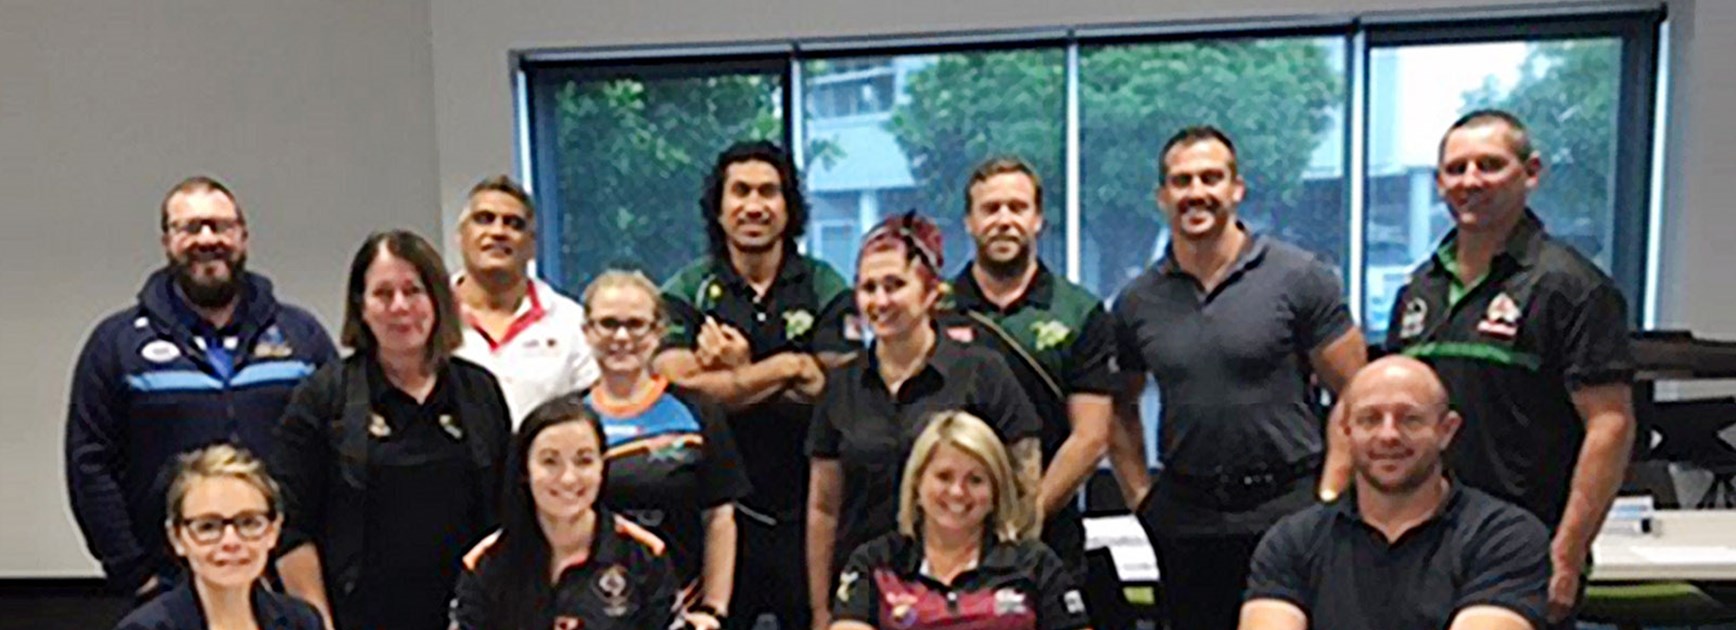 Newly-appointed Queensland Intrust Super Cup Club Wellbeing and Education staff attended an elite athlete wellbeing program in Brisbane